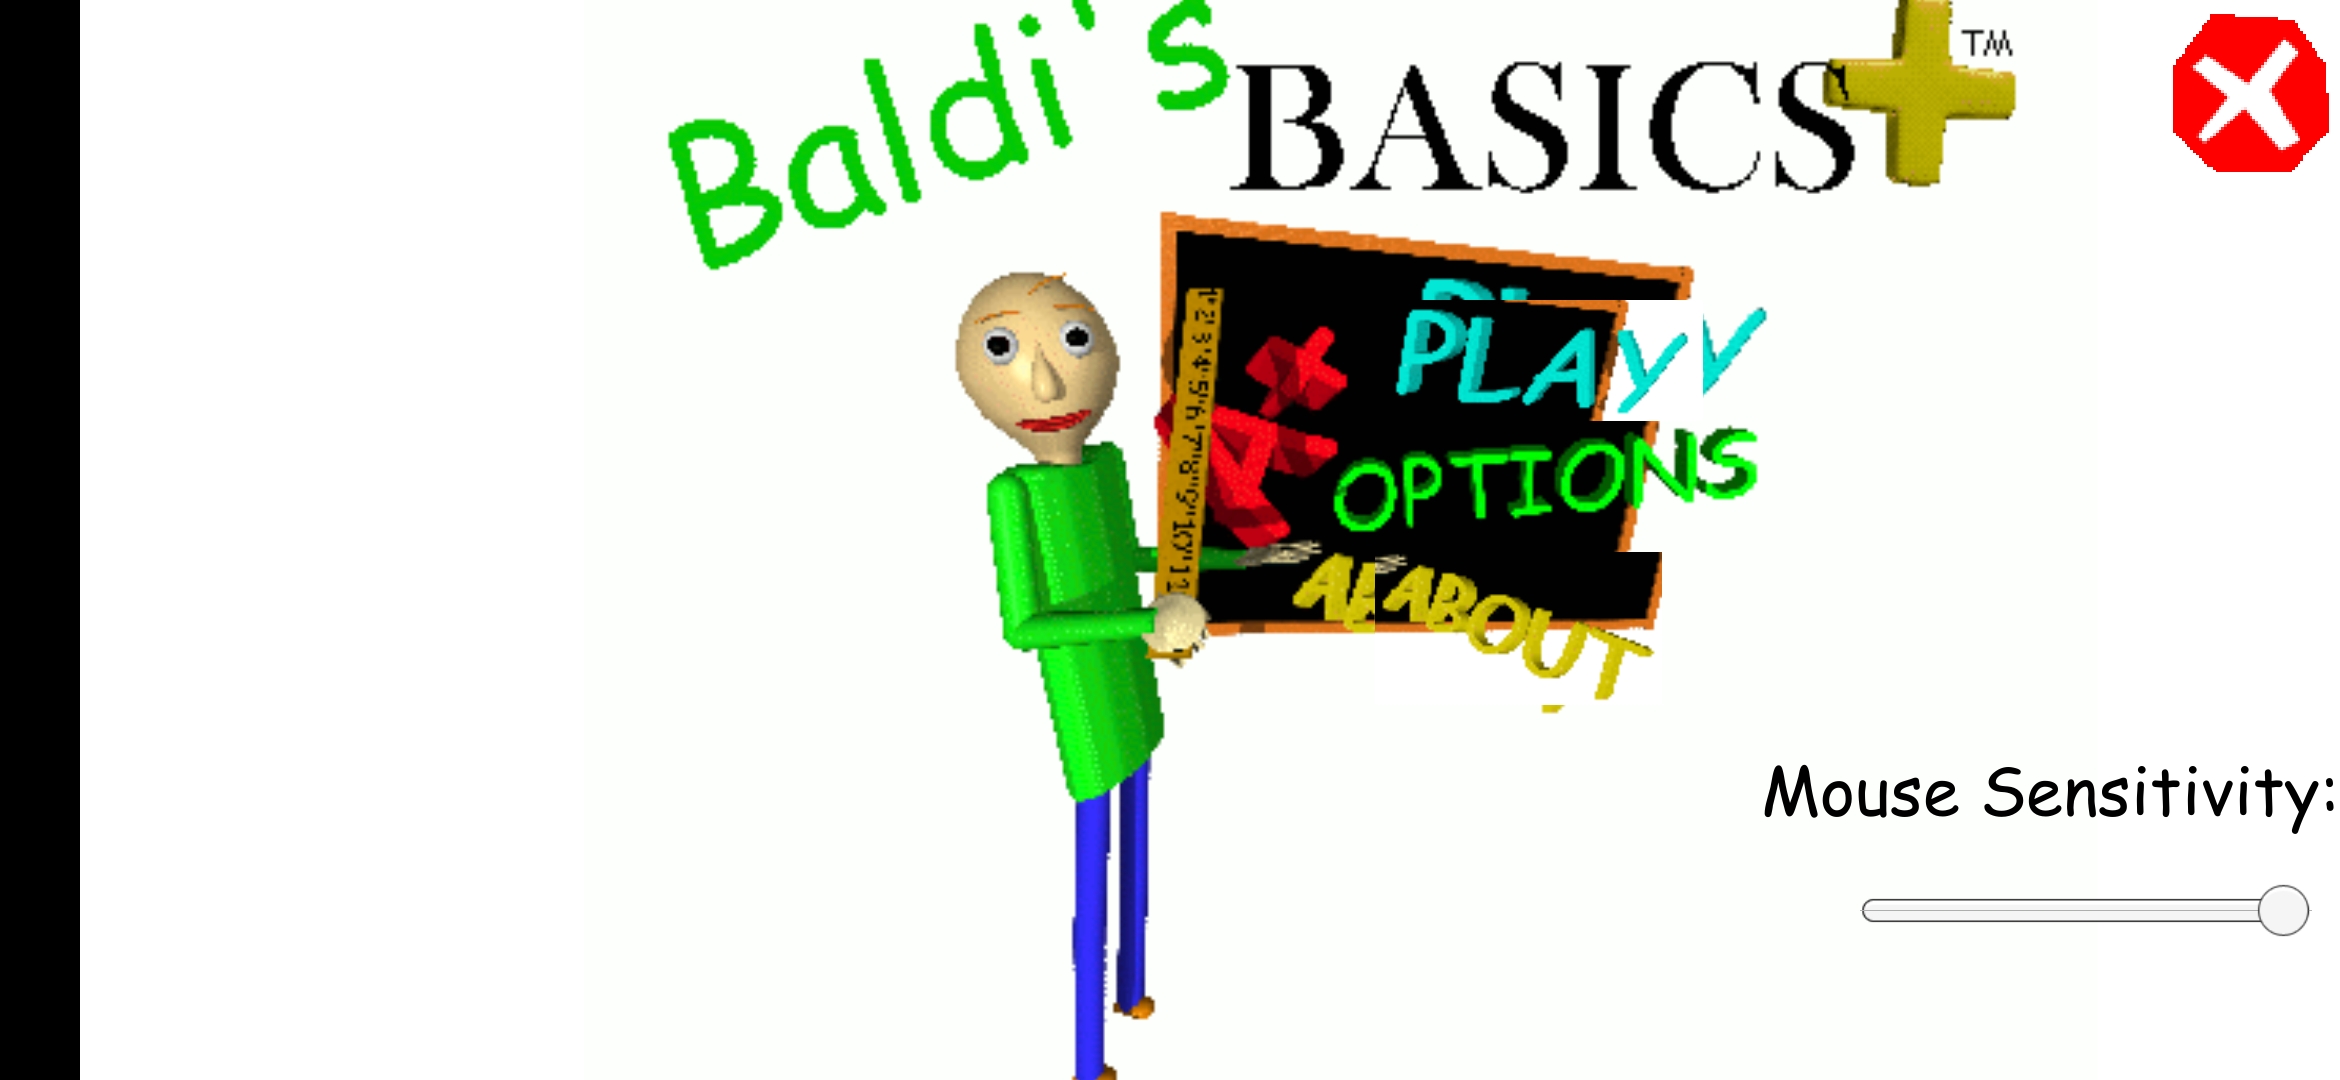 Baldi's basics plus android (fan made not official) by kot gh